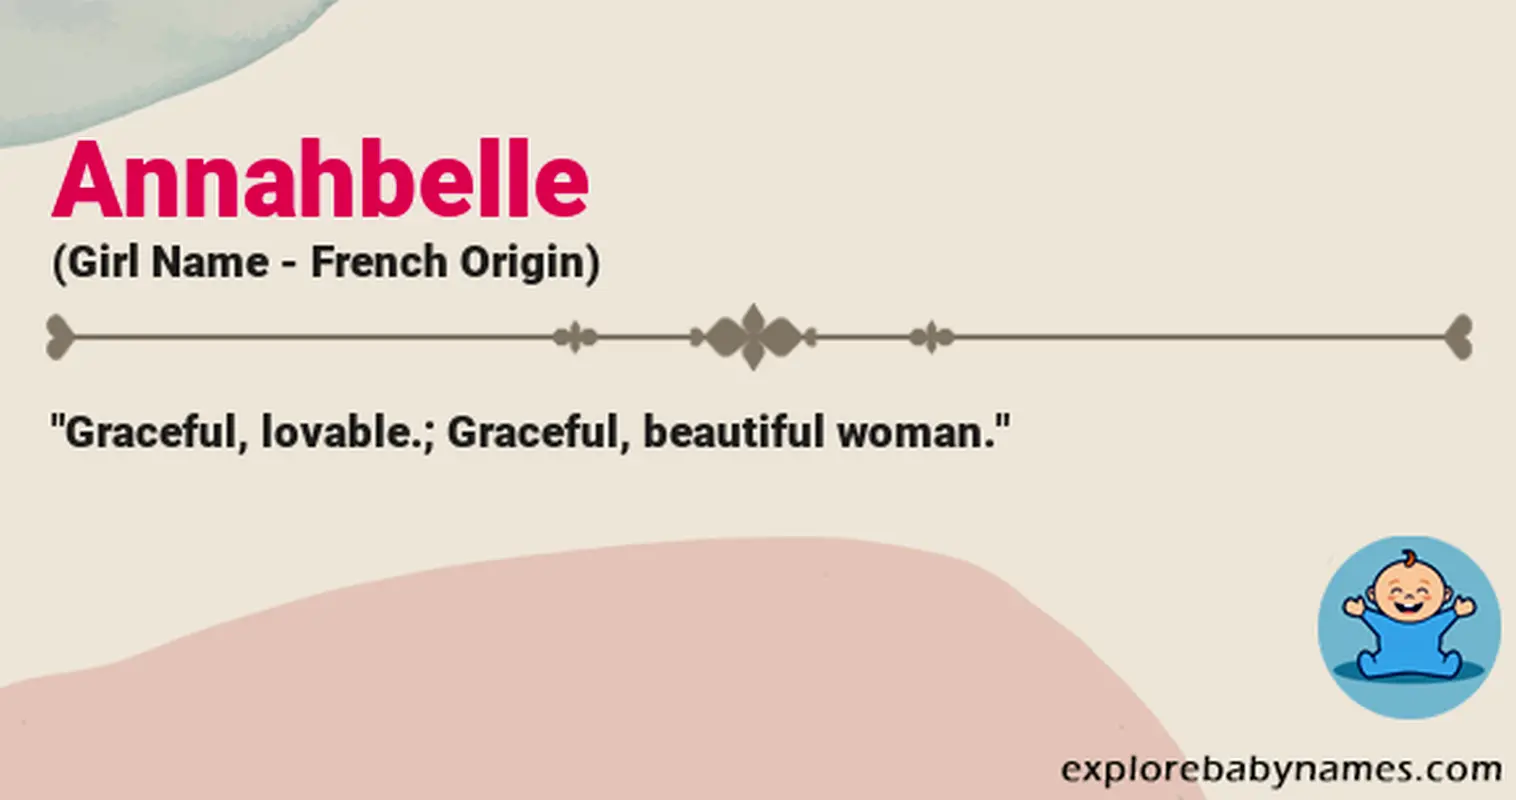 Meaning of Annahbelle